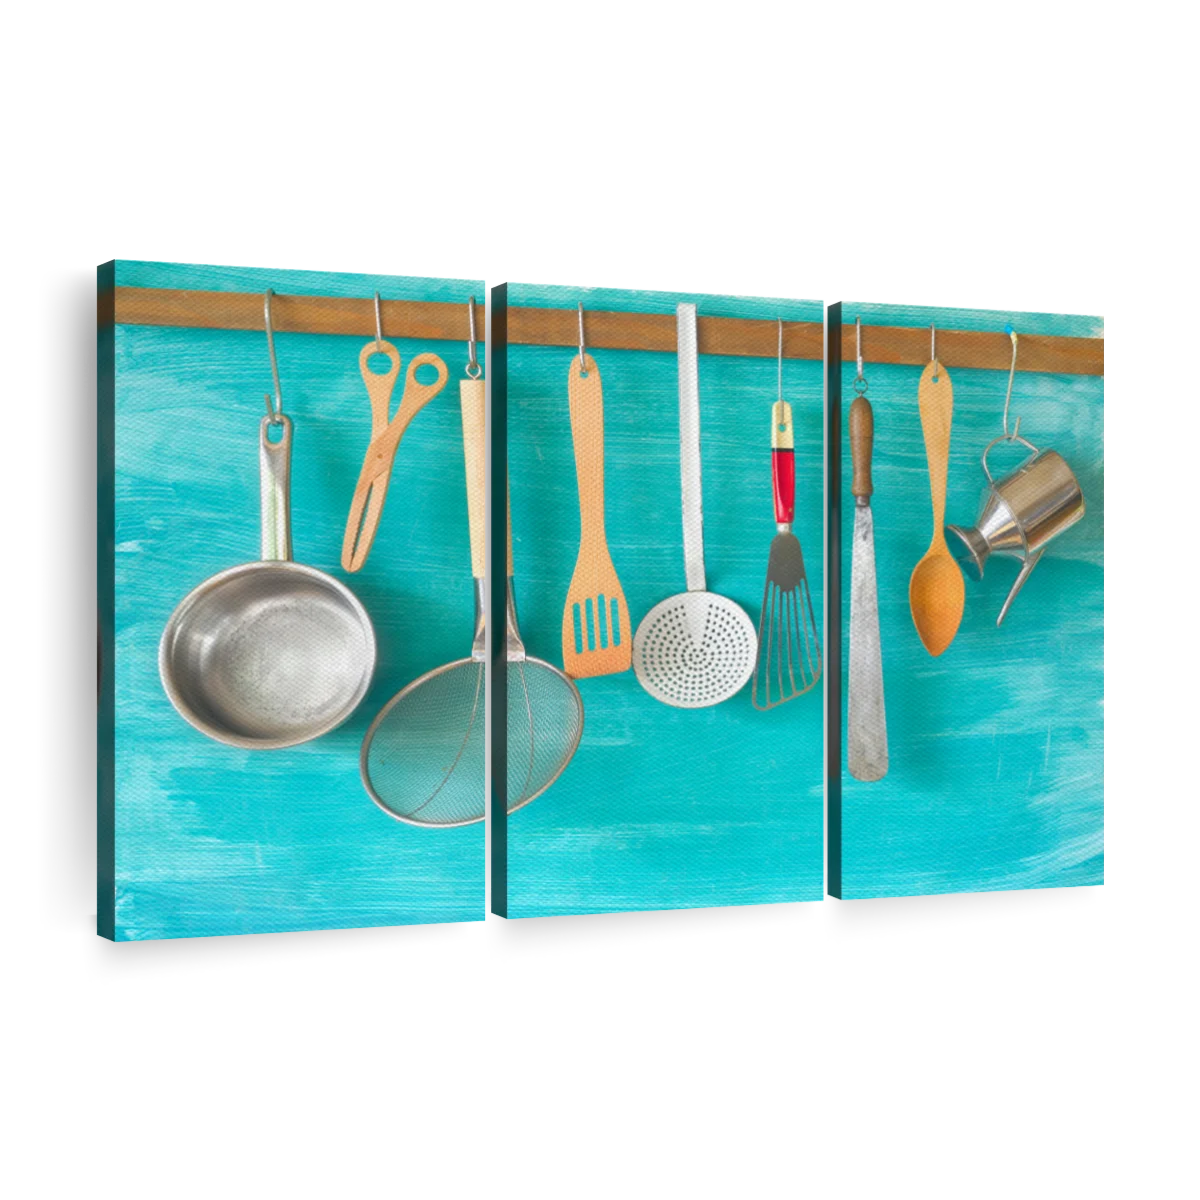 https://cdn.shopify.com/s/files/1/1568/8443/products/puo_es_a6f_layout_3_horizontal_hanging-kitchen-tools-3-piece-wall-art.webp?v=1669133624